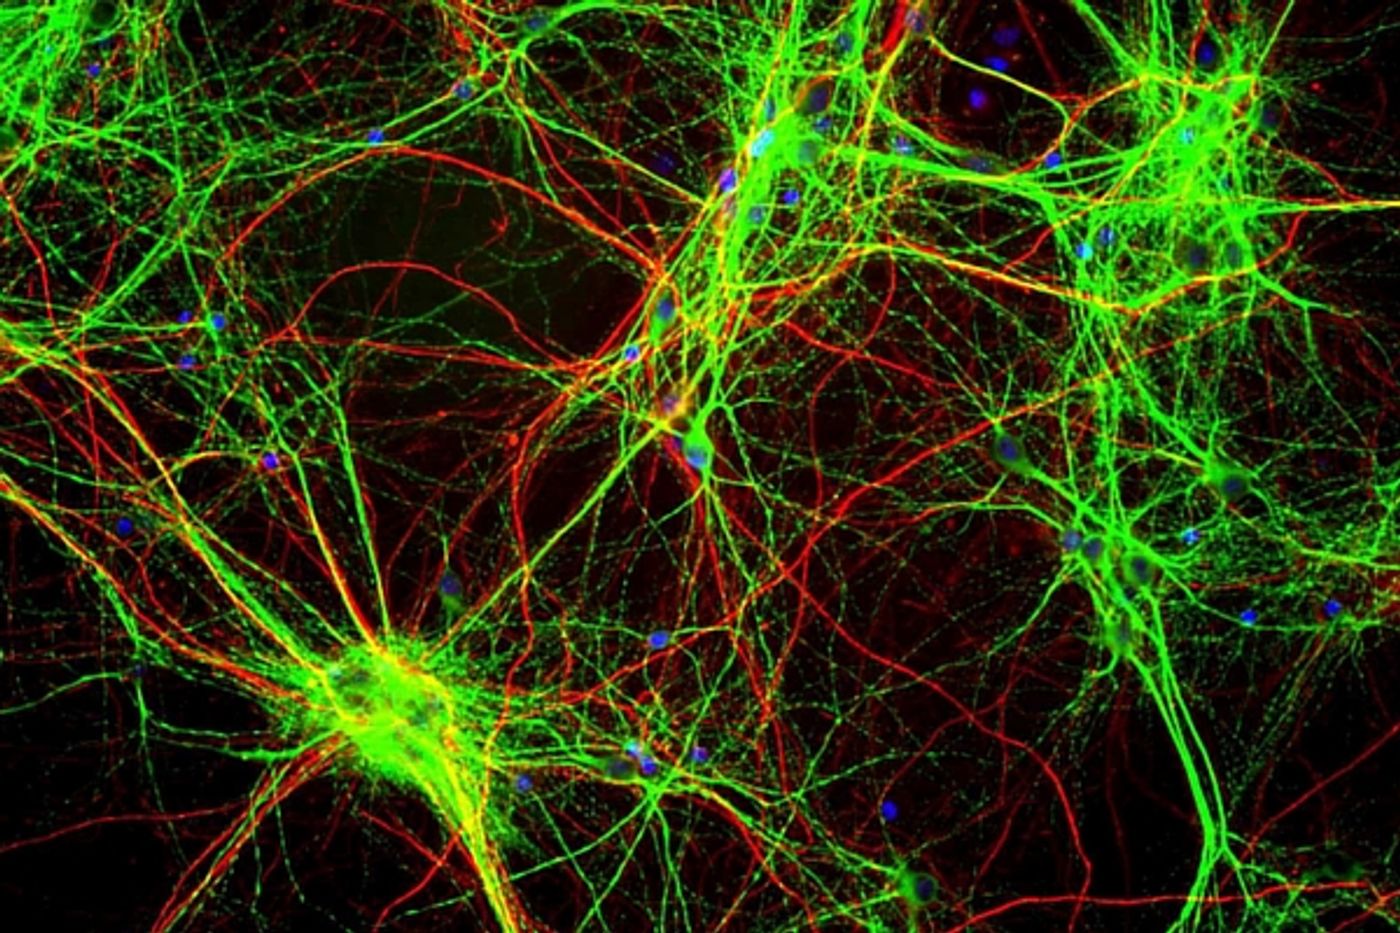 Dendrites are part of how the brain processes visual input